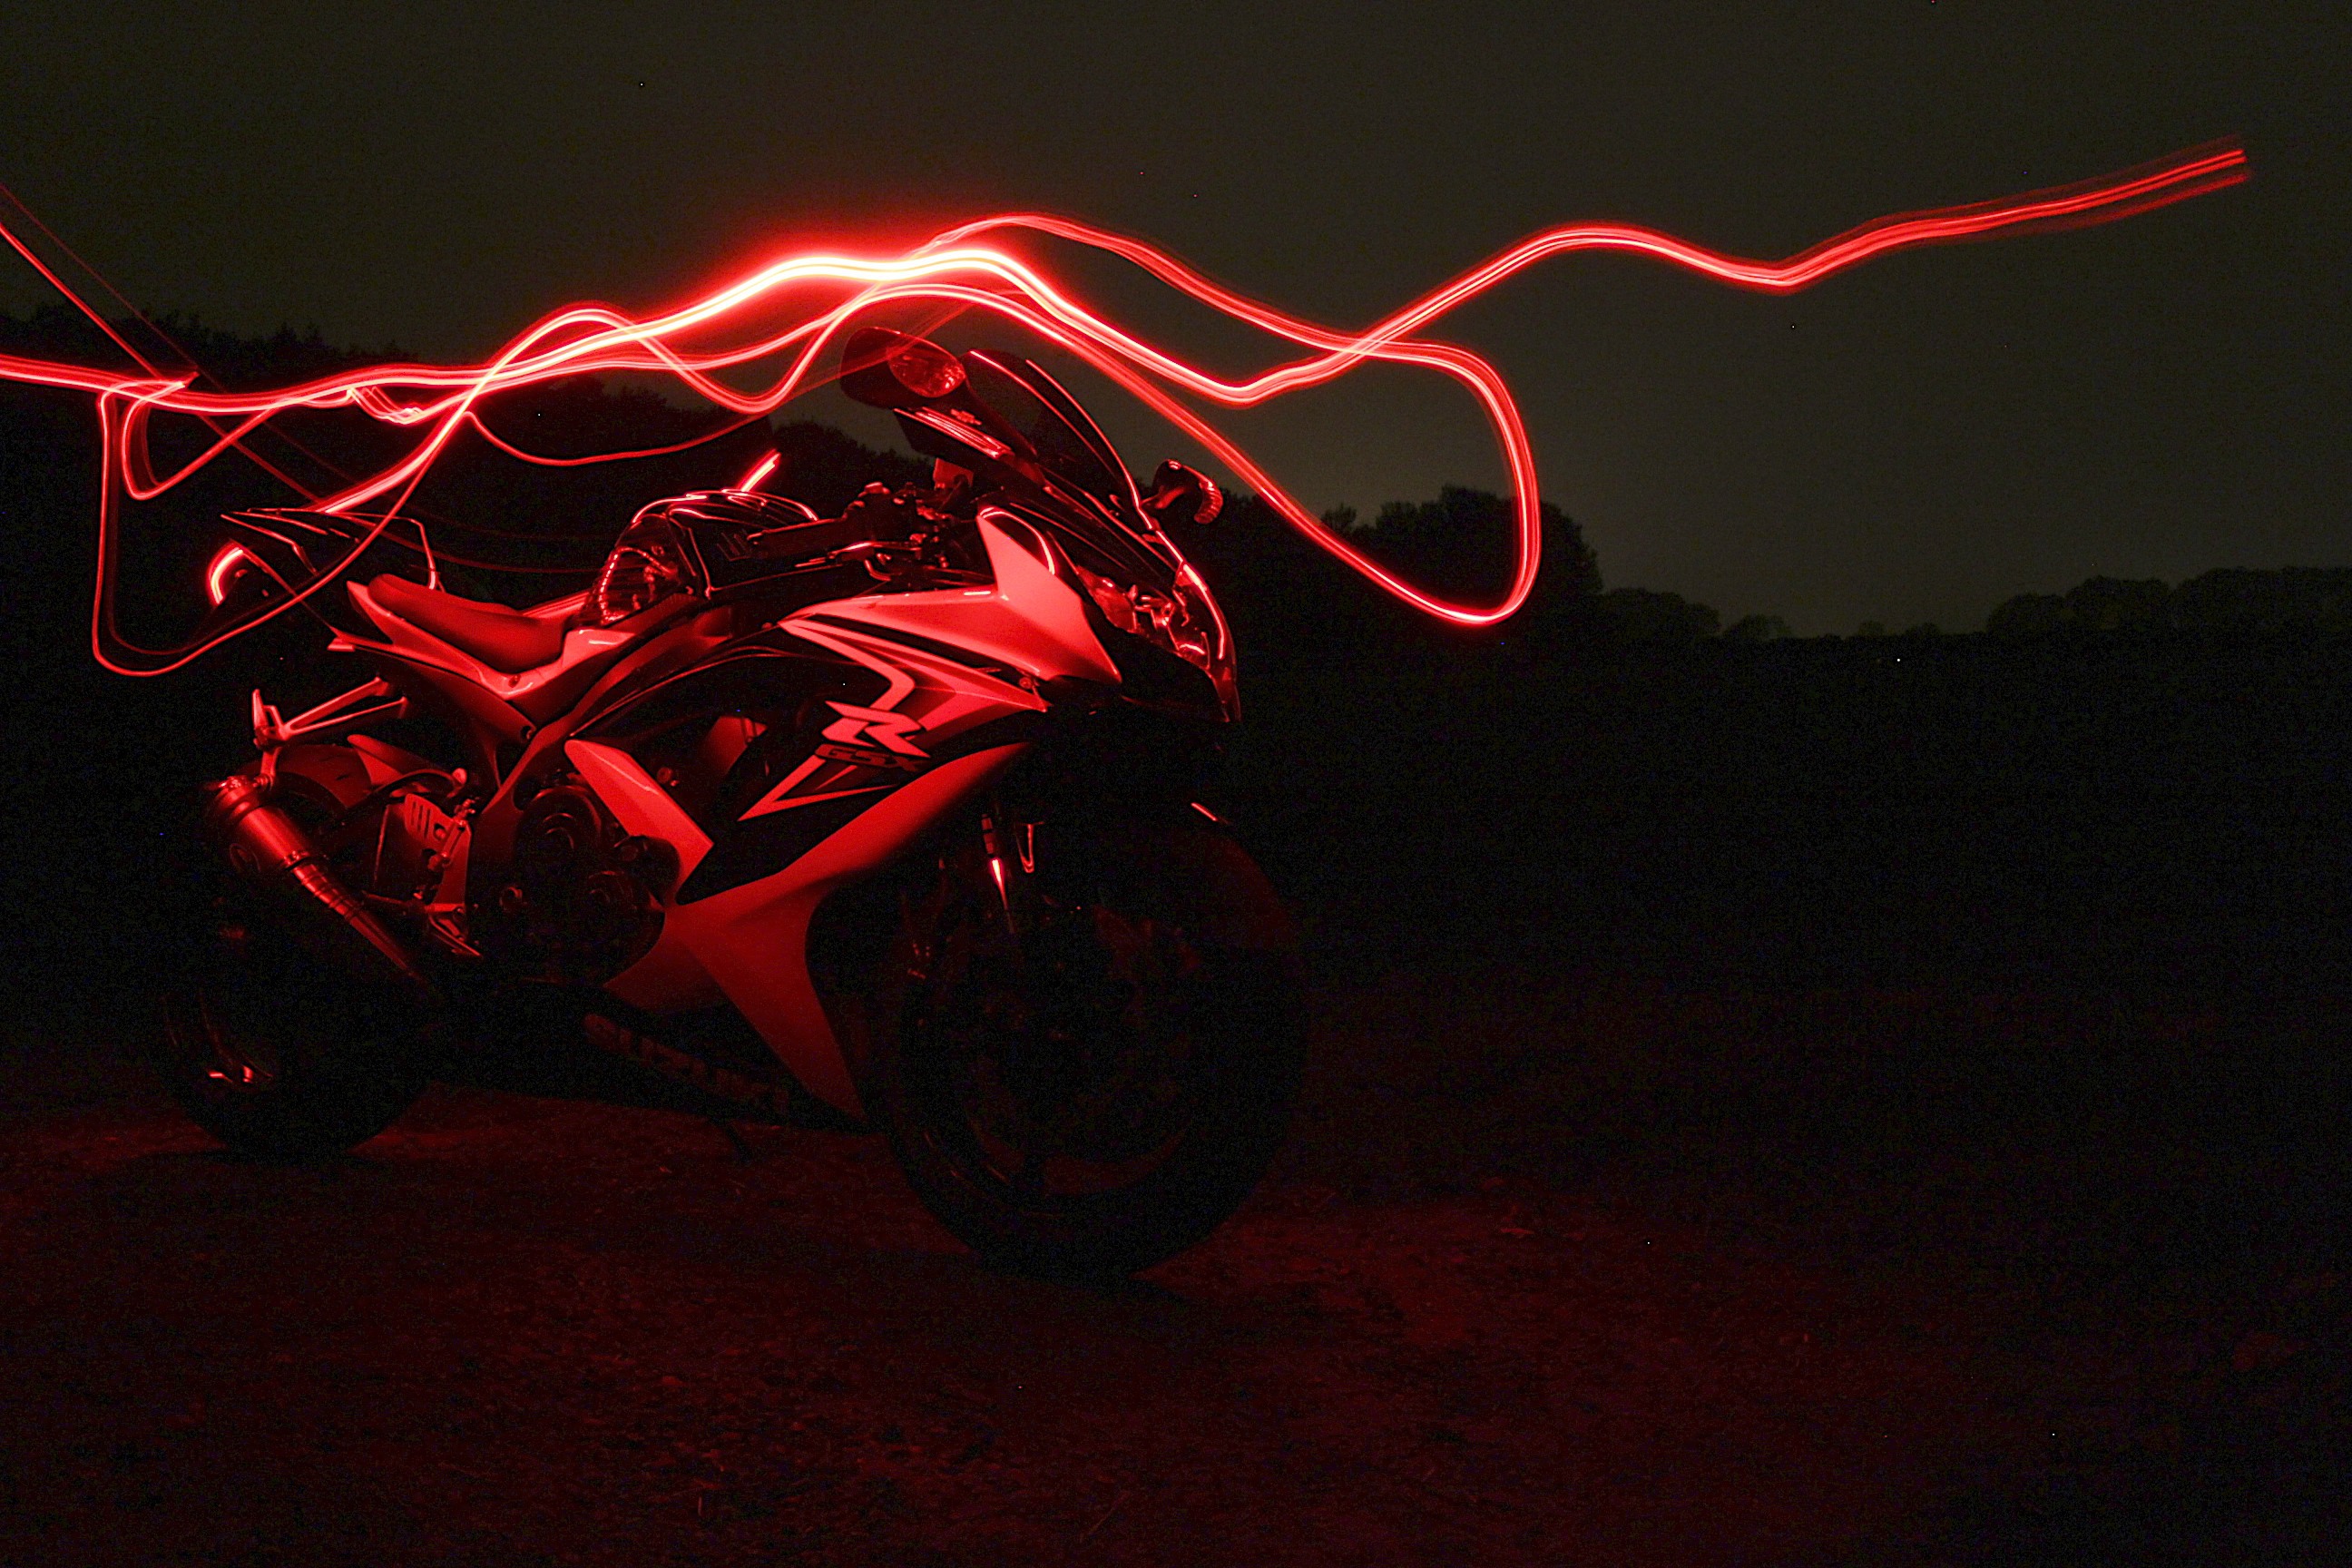 Red Neon Susuki Gsx 750r Wallpaper And Image